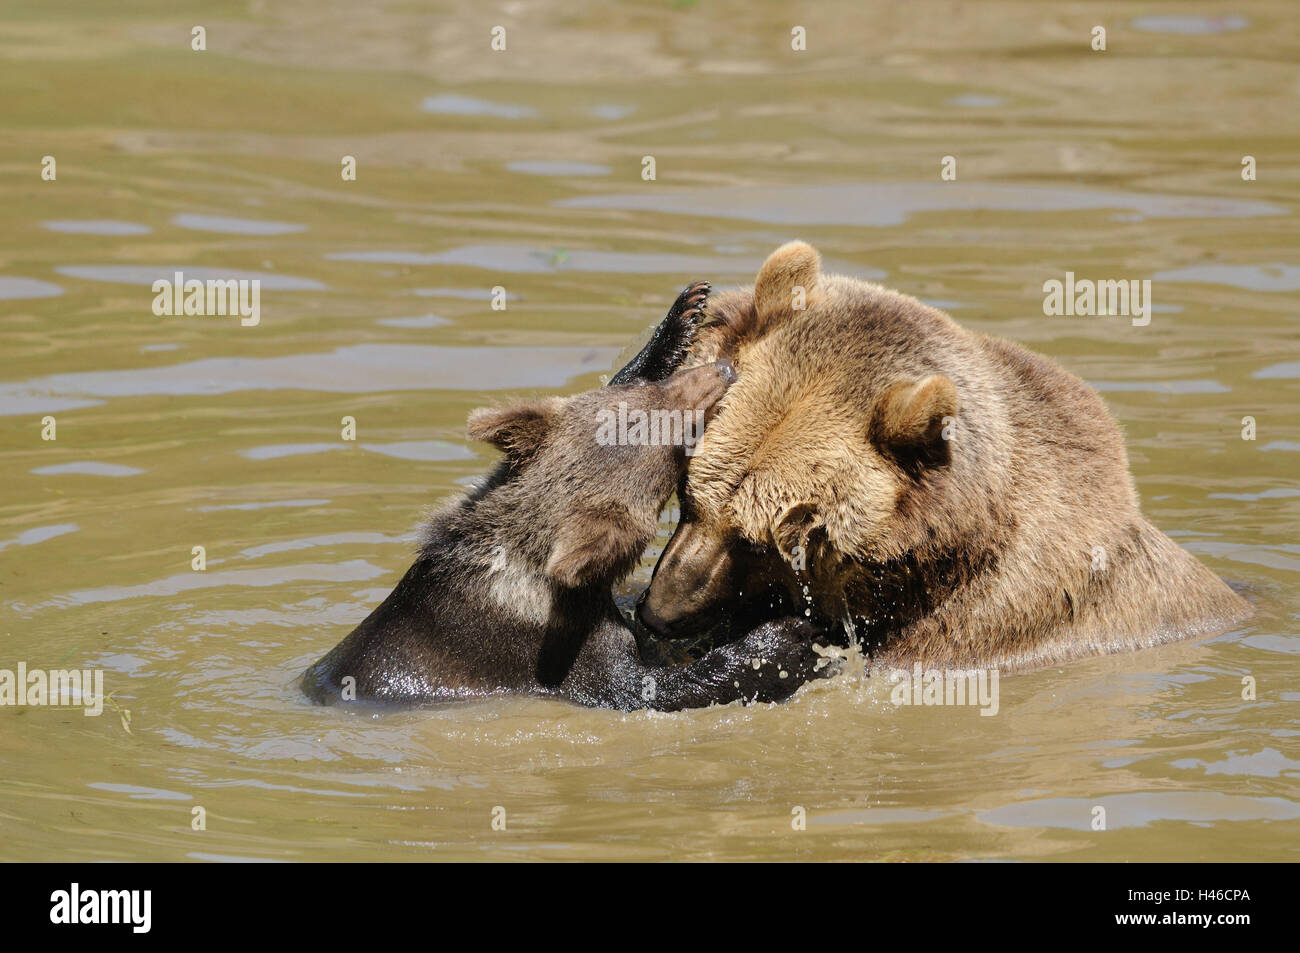 Brown bears, Ursus arctos, nut with young animal, water, side view, Stock Photo